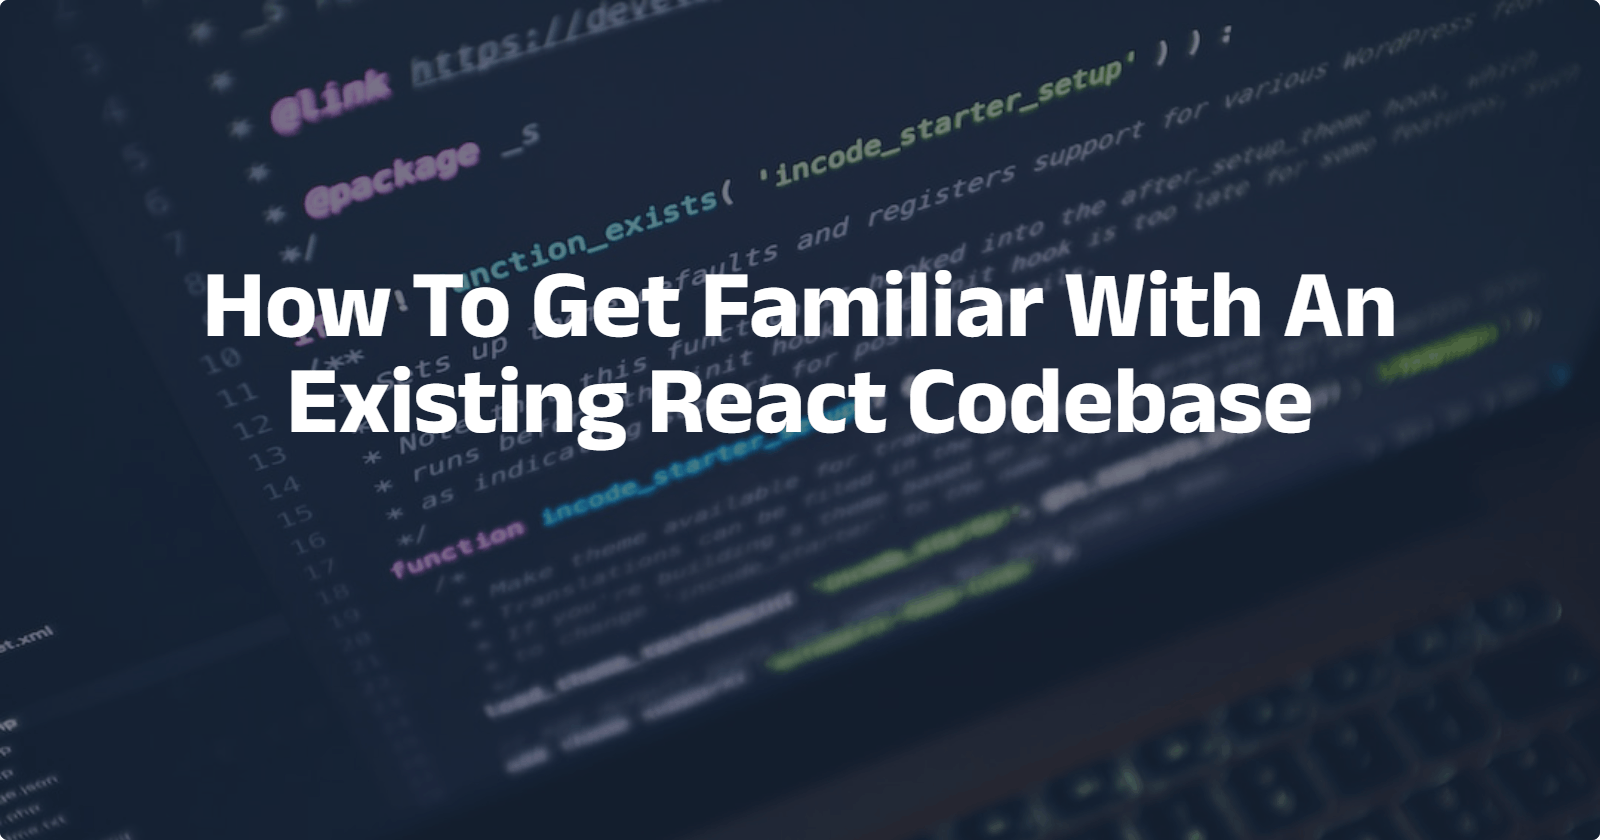 How To Get Familiar With An Existing React Codebase